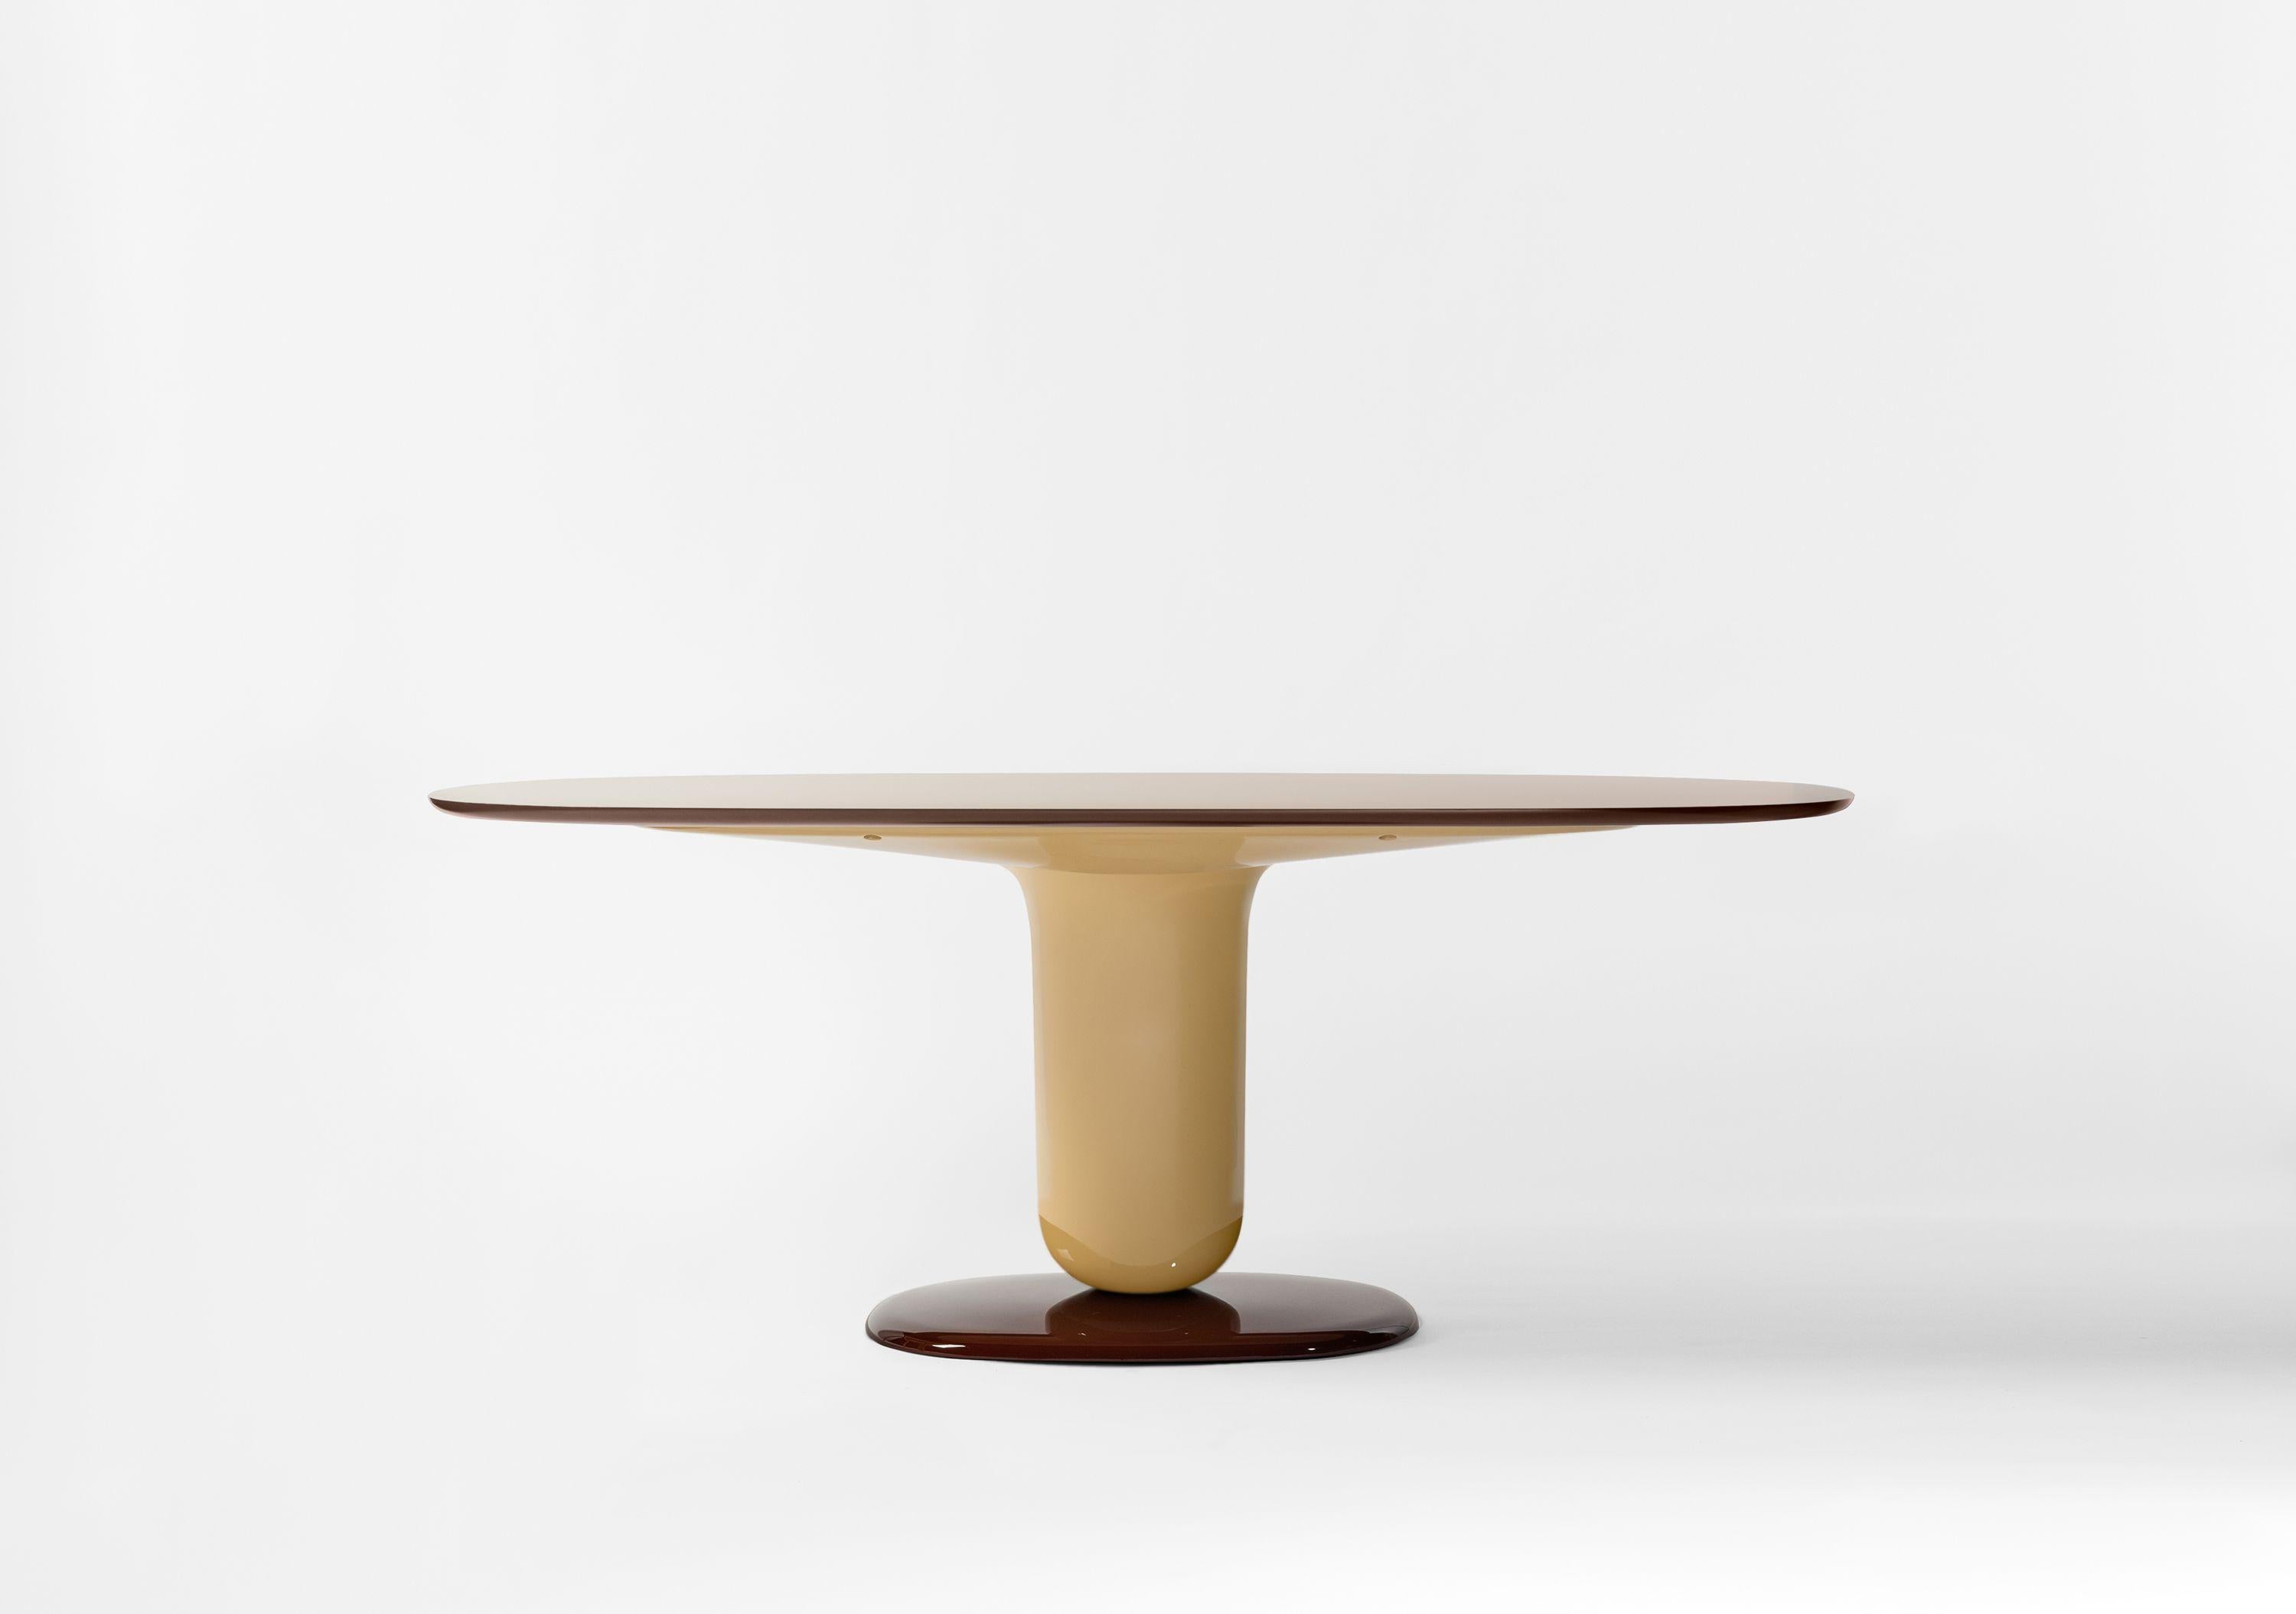 Table designed by Jaime Hayon in 2021, added to the Explorer collection that started in 2019.
Manufactured by BD Barcelona in Spain.

As a continuation of the playful explorer table series and following its elegant beauty, we are proud to